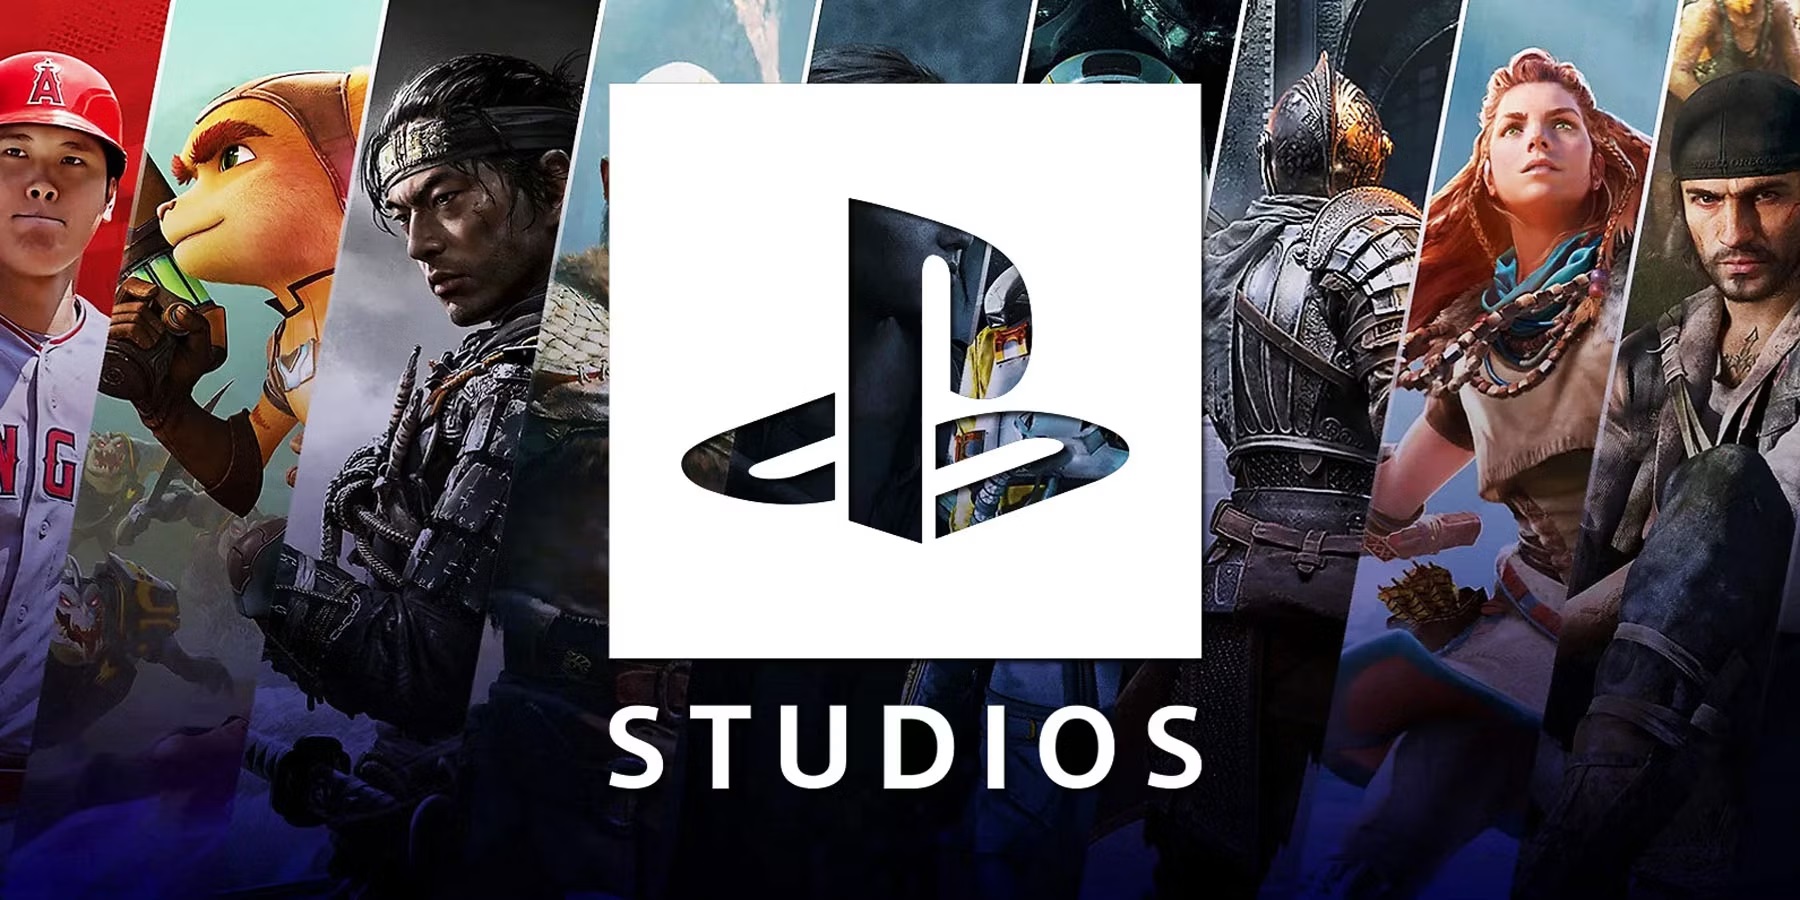 Ghost of Tsushima has become Sony’s largest single-player PlayStation PC release